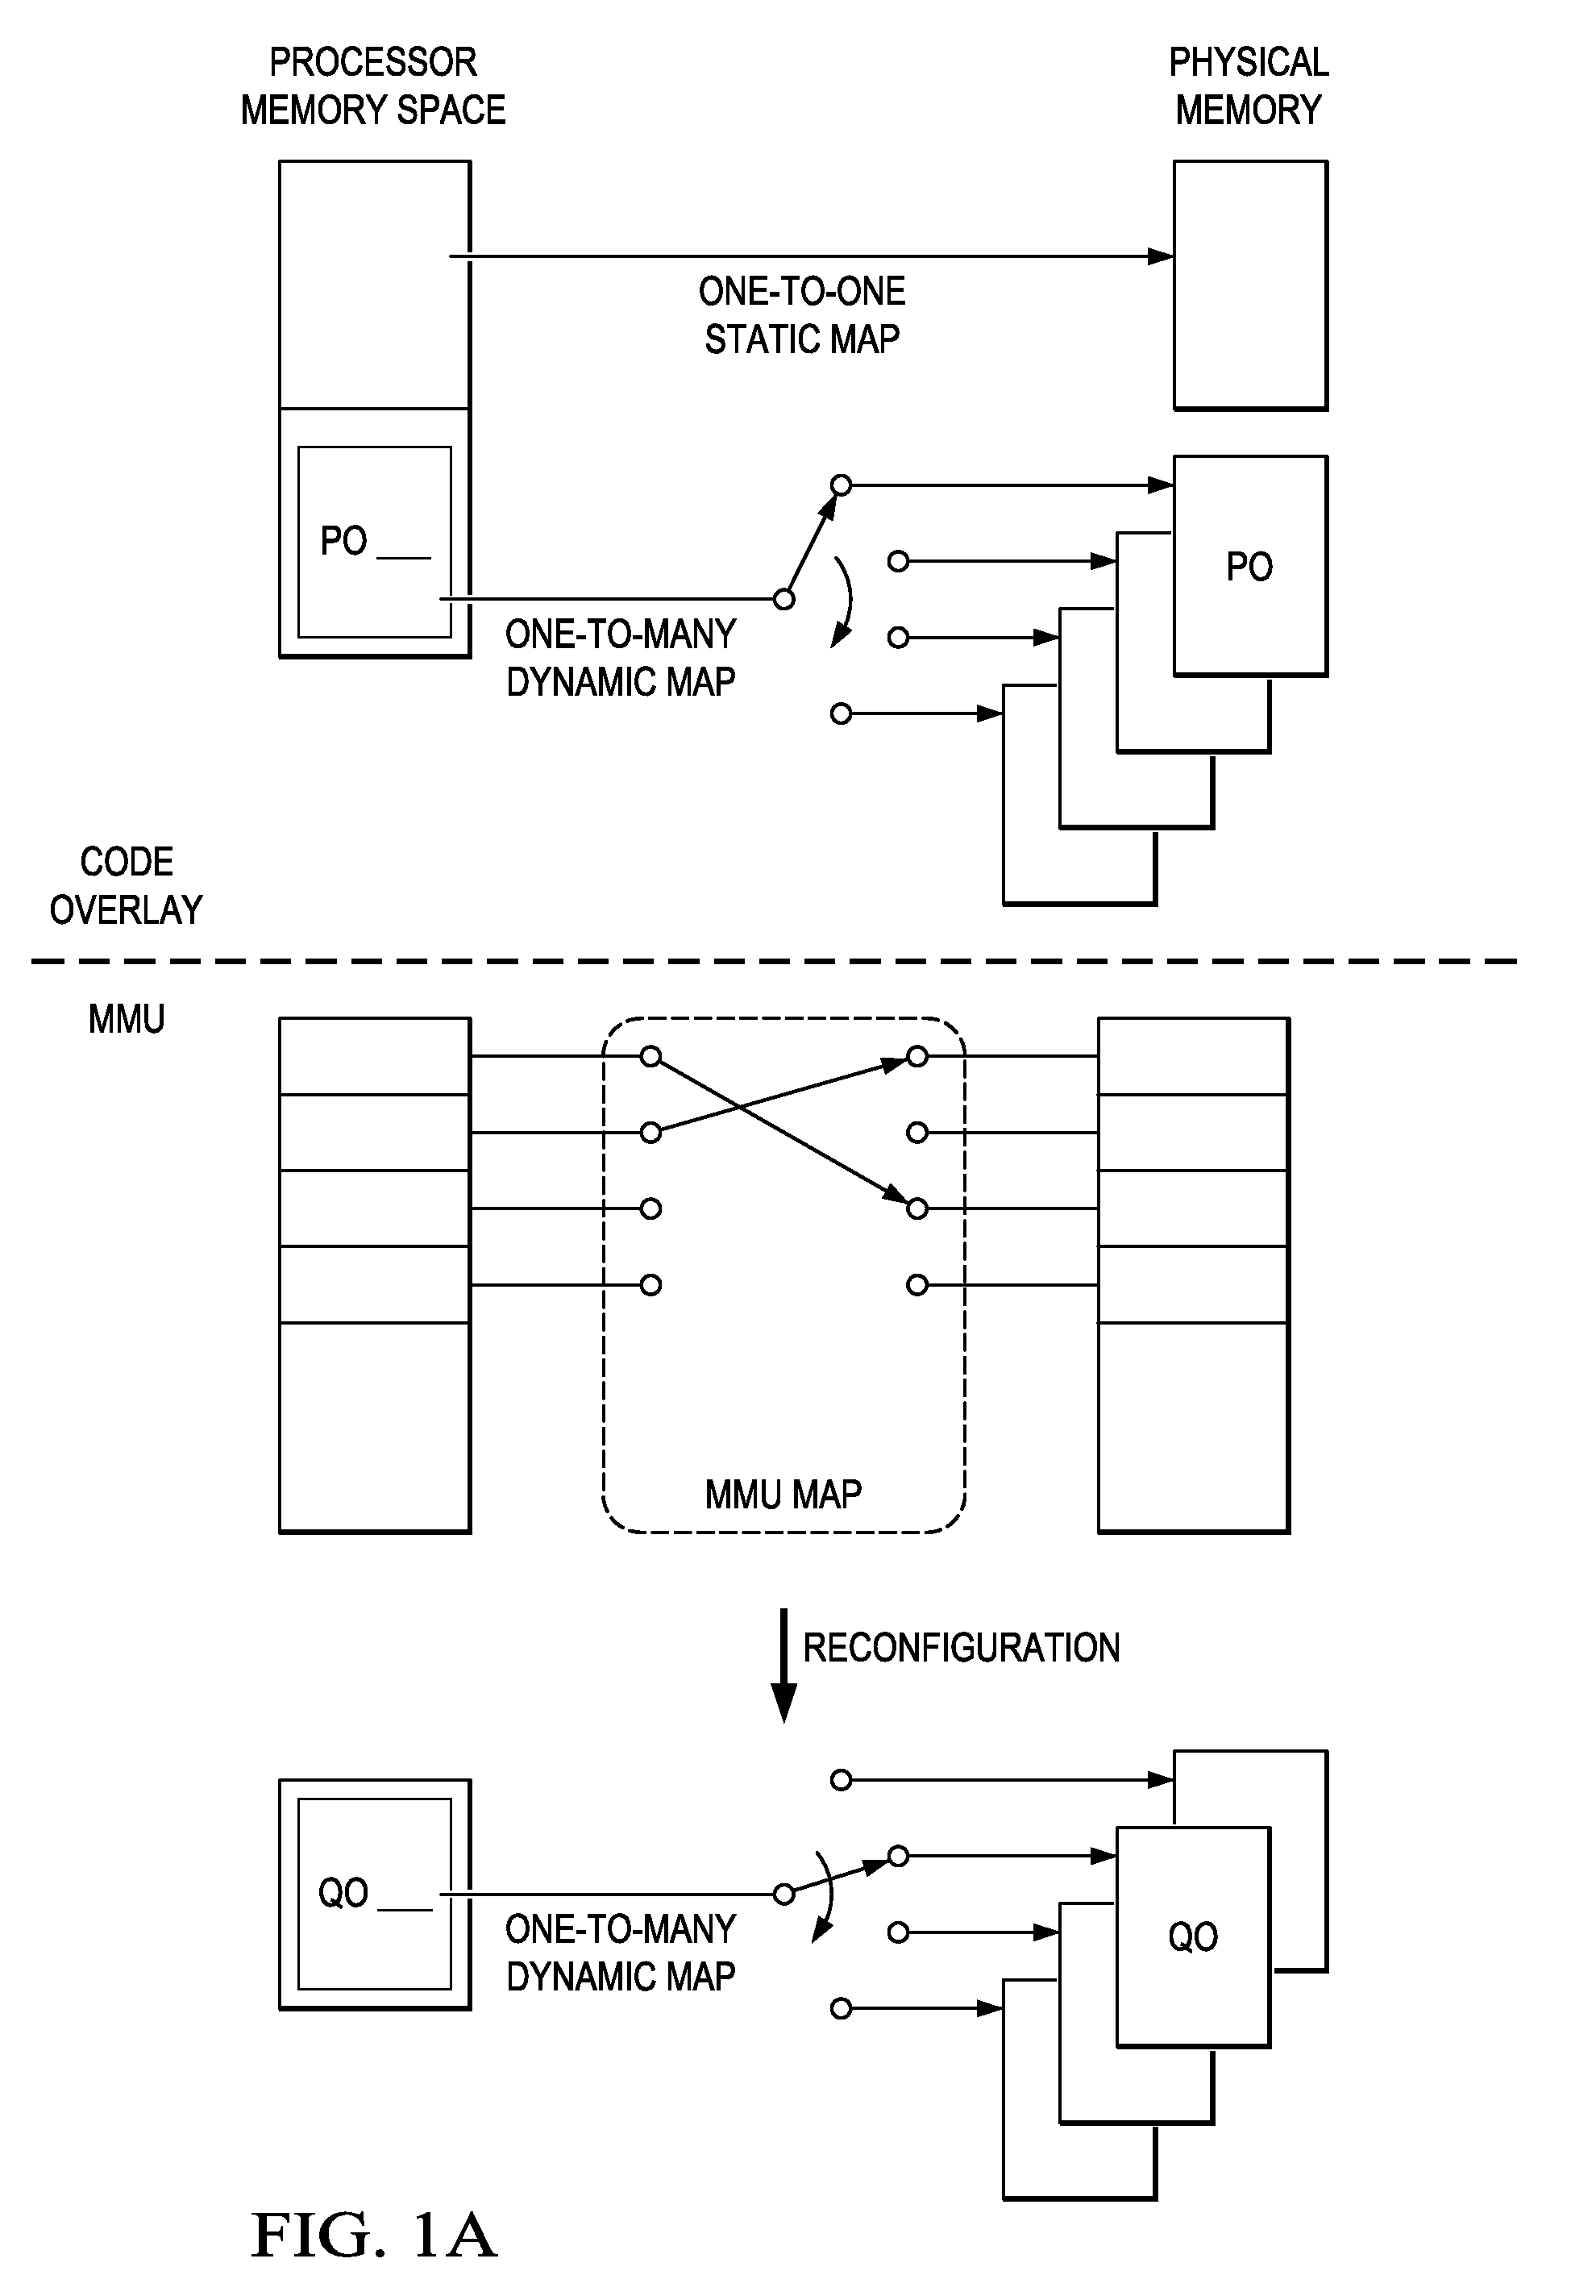 Processors with branch instruction, circuits, systems and processes of manufacture and operation